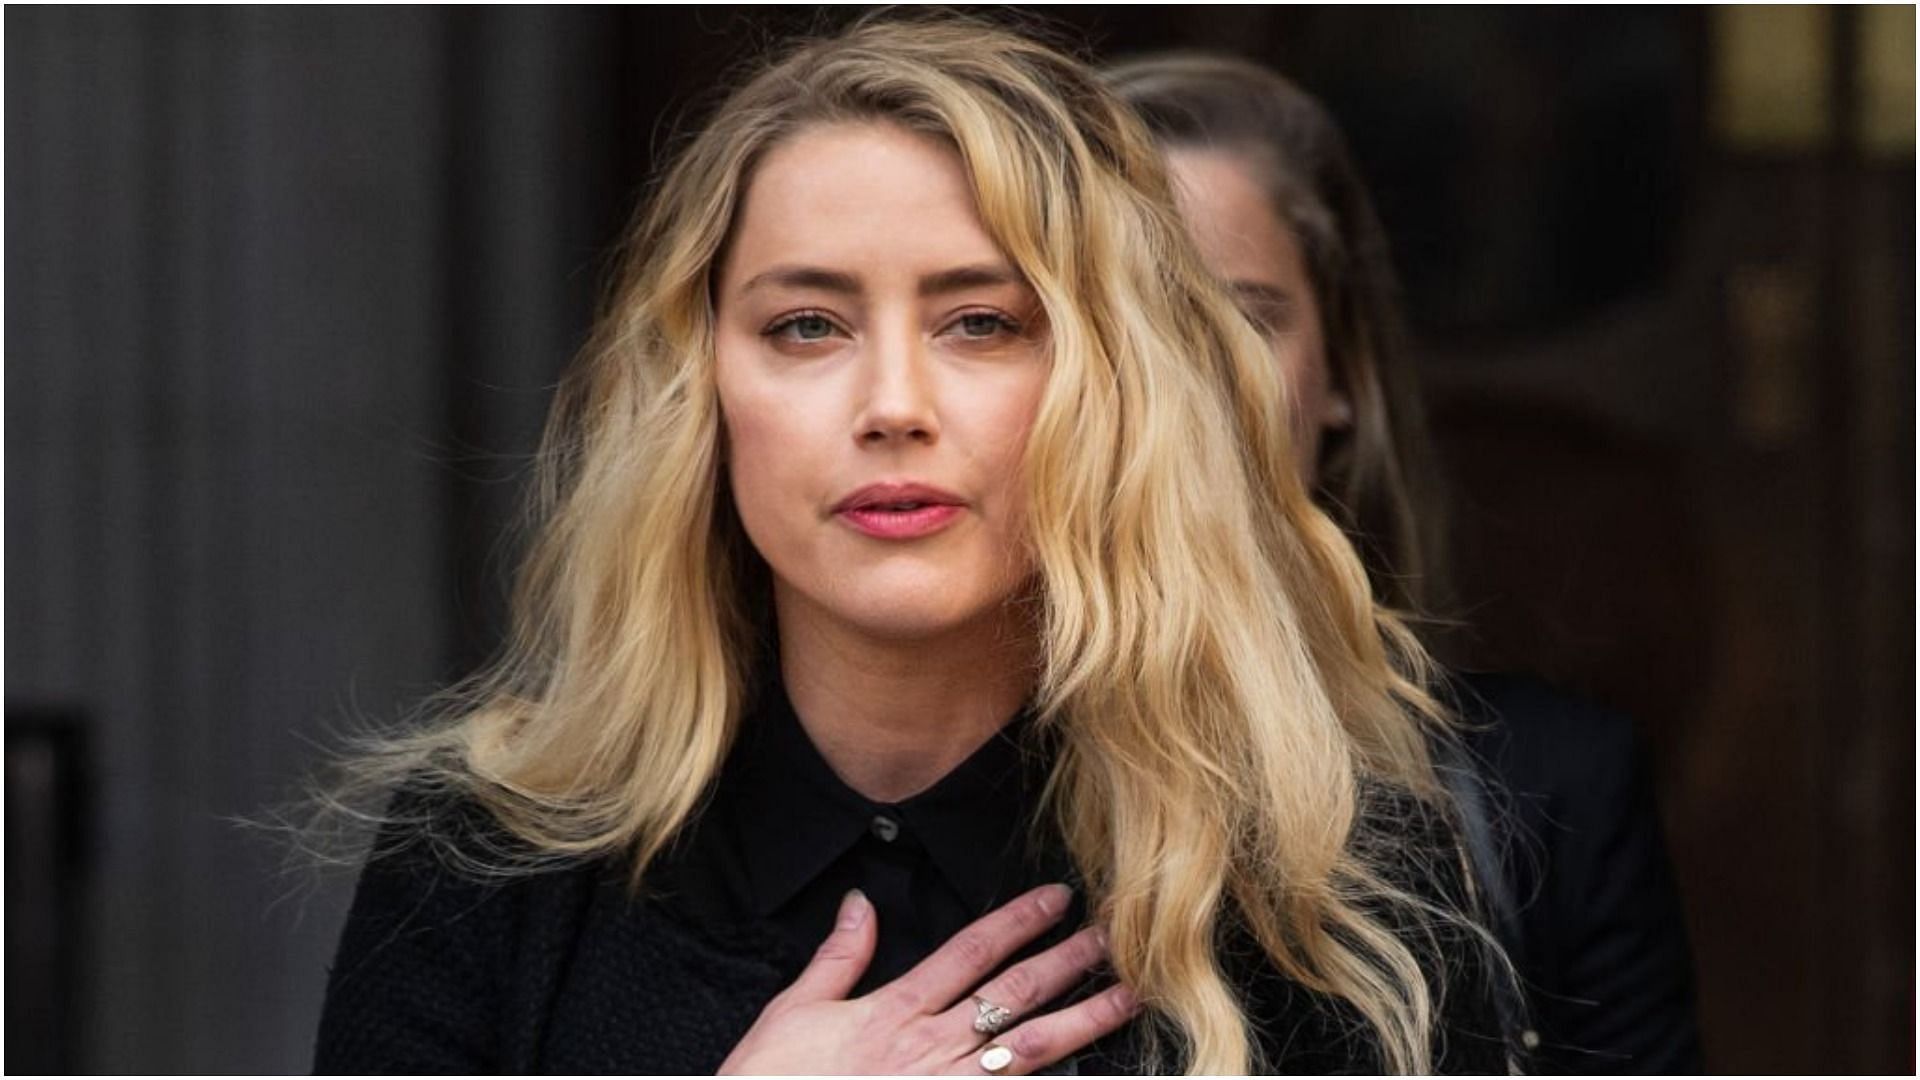 Milani Cosmetics has denied that Amber Heard was using their product (Image via Samir Hussein/Getty Images)